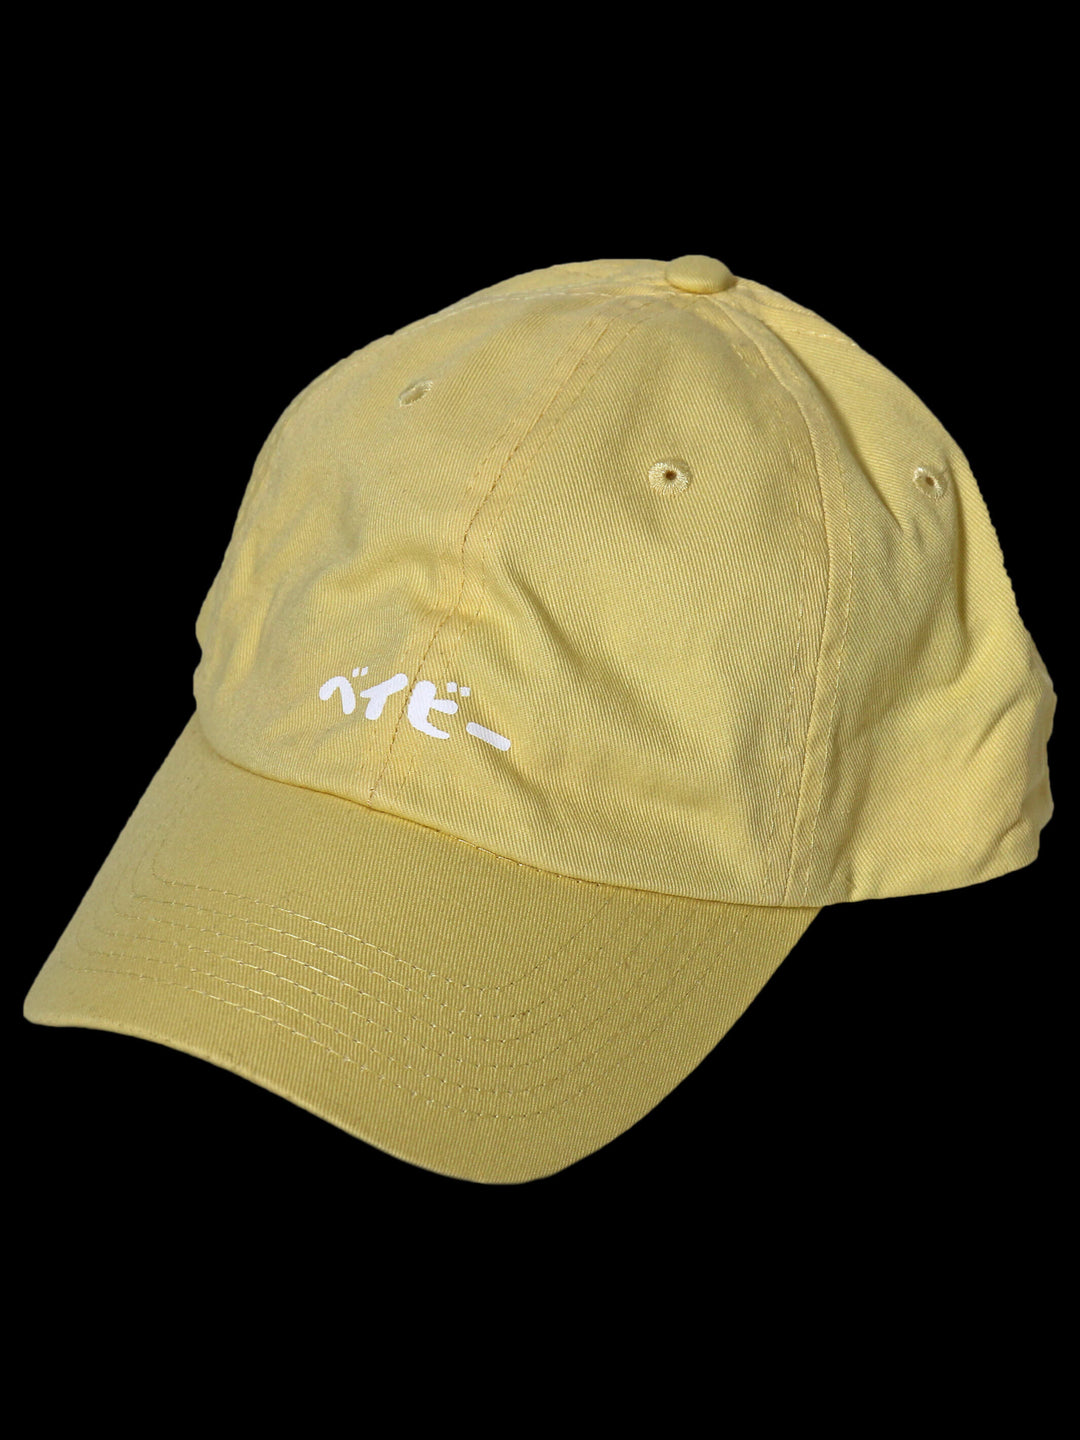 Soft yellow polo cap that says 'Baby' in Japanese.